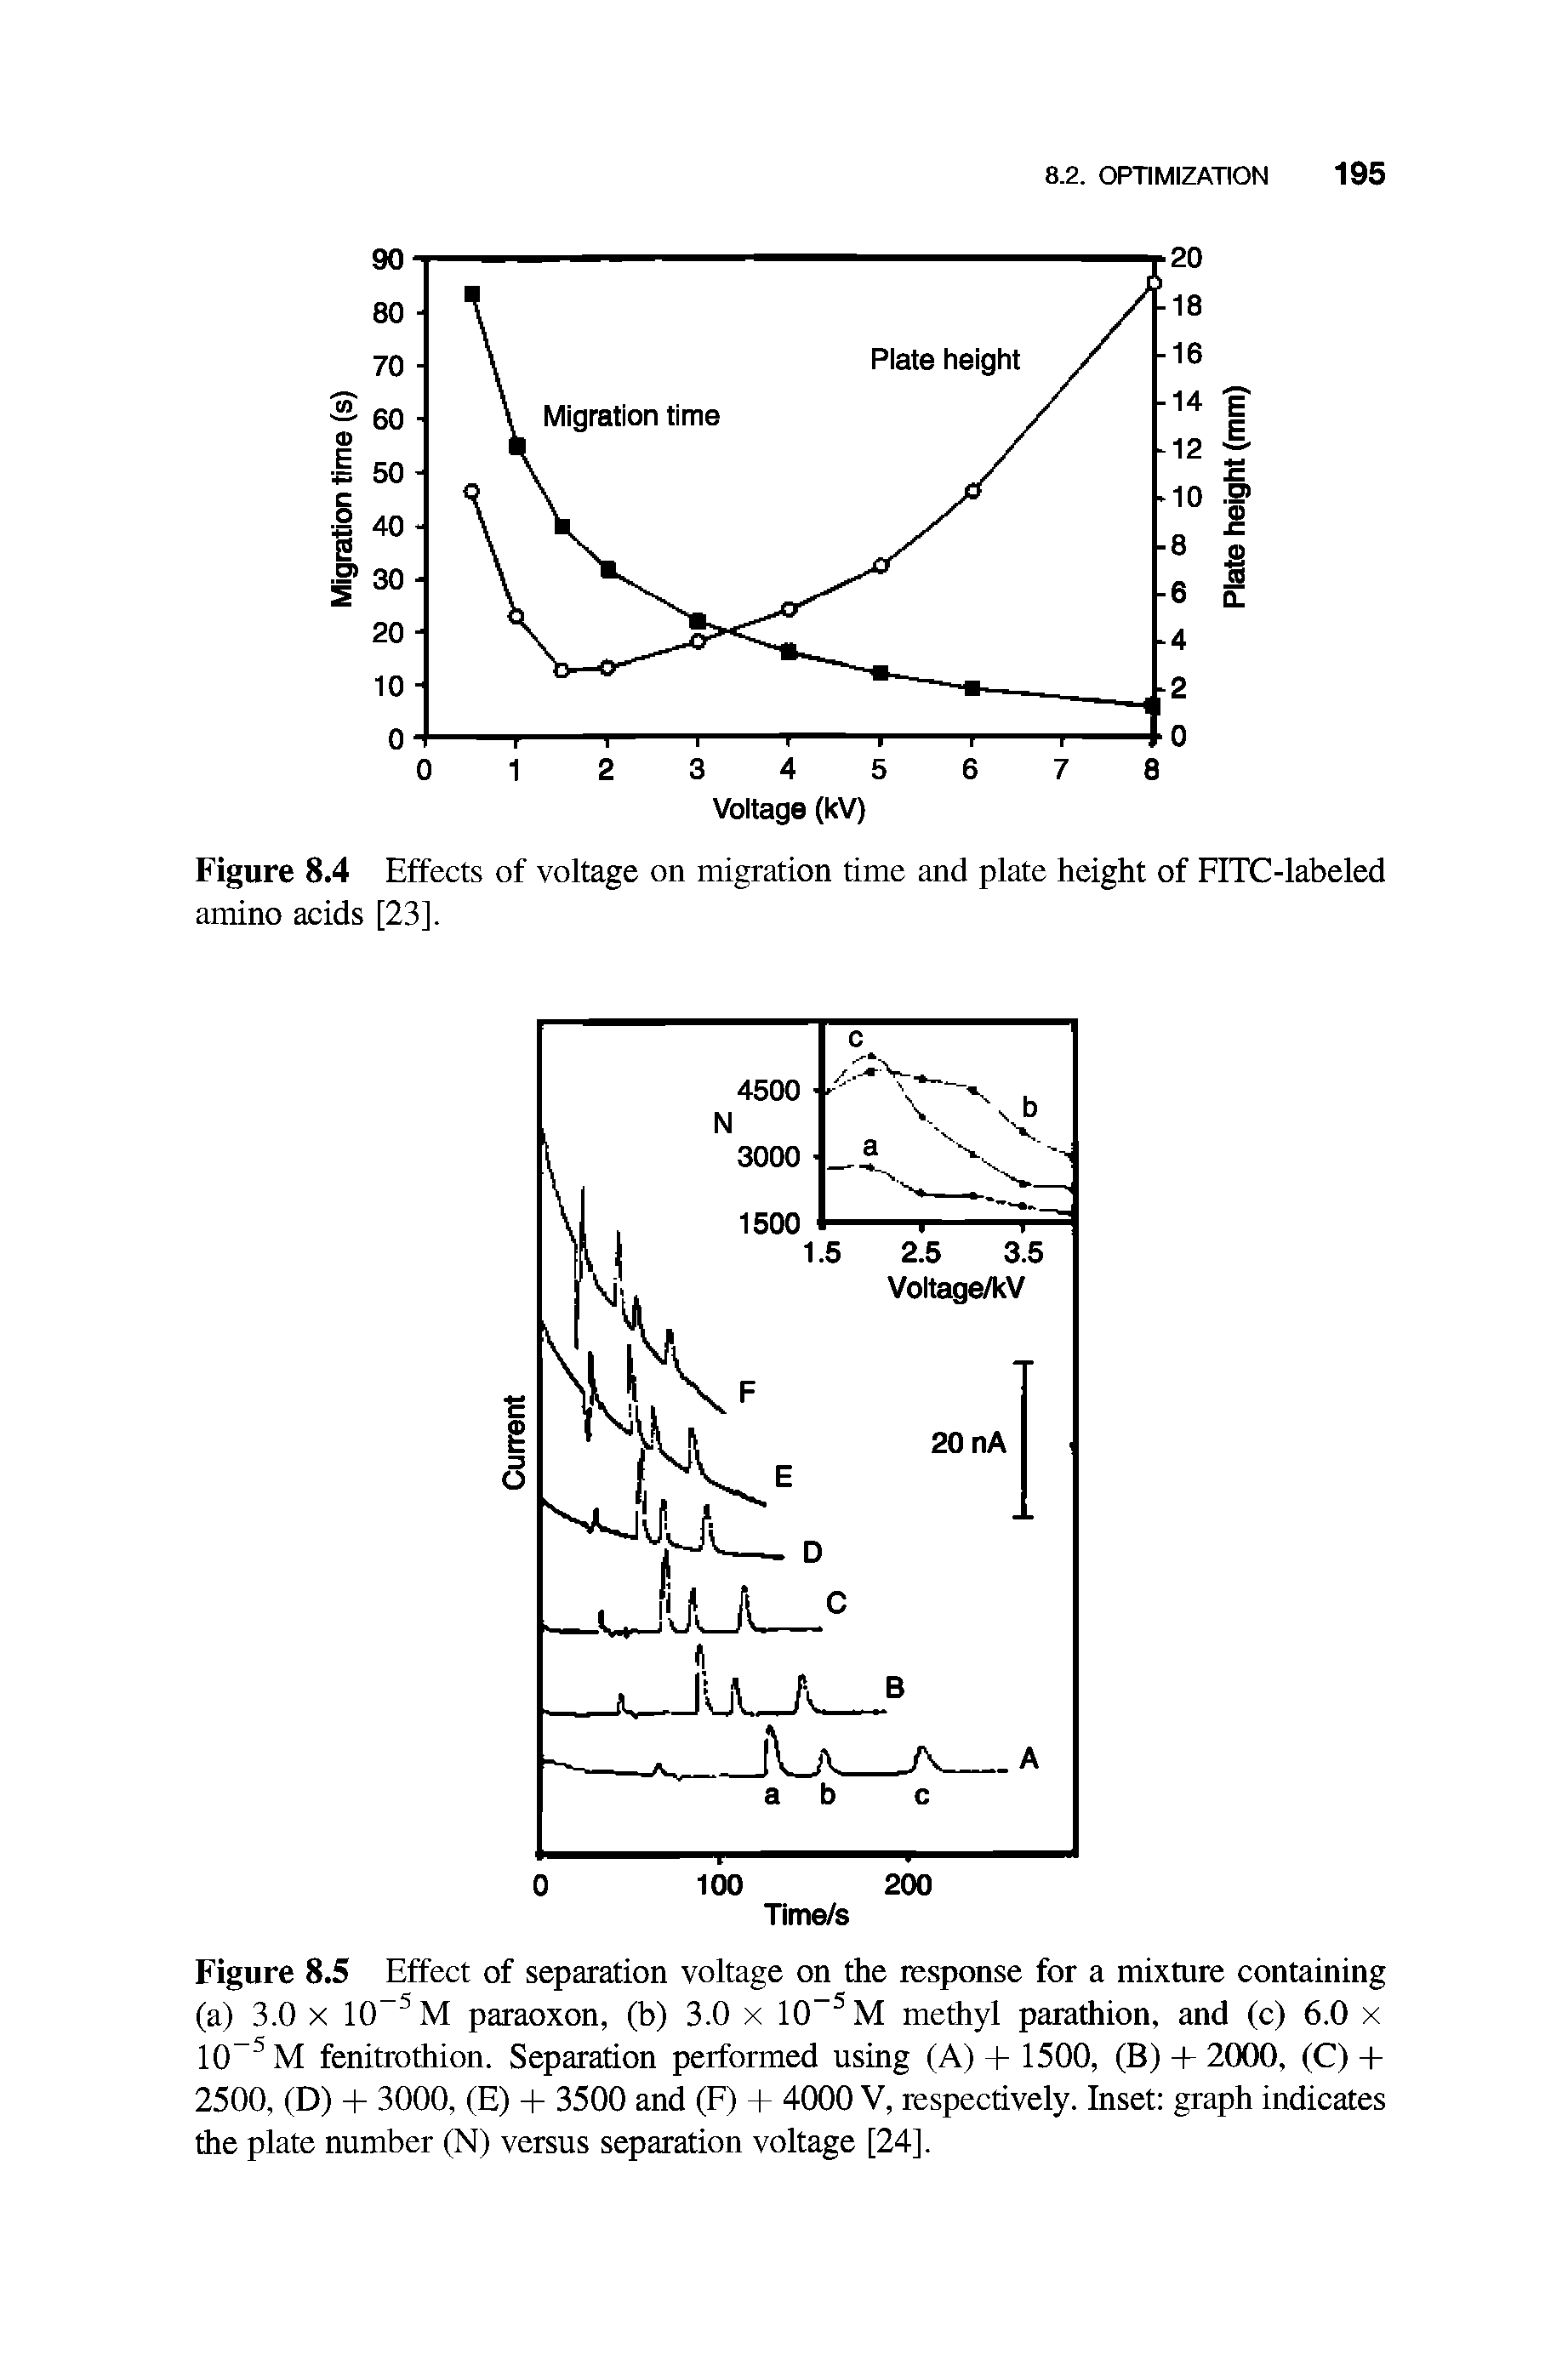 Figure 8.5 Effect of separation voltage on the response for a mixture containing (a) 3.0 x 10-5M paraoxon, (b) 3.0 x 10-5M methyl parathion, and (c) 6.0 x 10-5M fenitrothion. Separation performed using (A) + 1500, (B) + 2000, (C) + 2500, (D) + 3000, (E) + 3500 and (F) + 4000 V, respectively. Inset graph indicates the plate number (N) versus separation voltage [24].